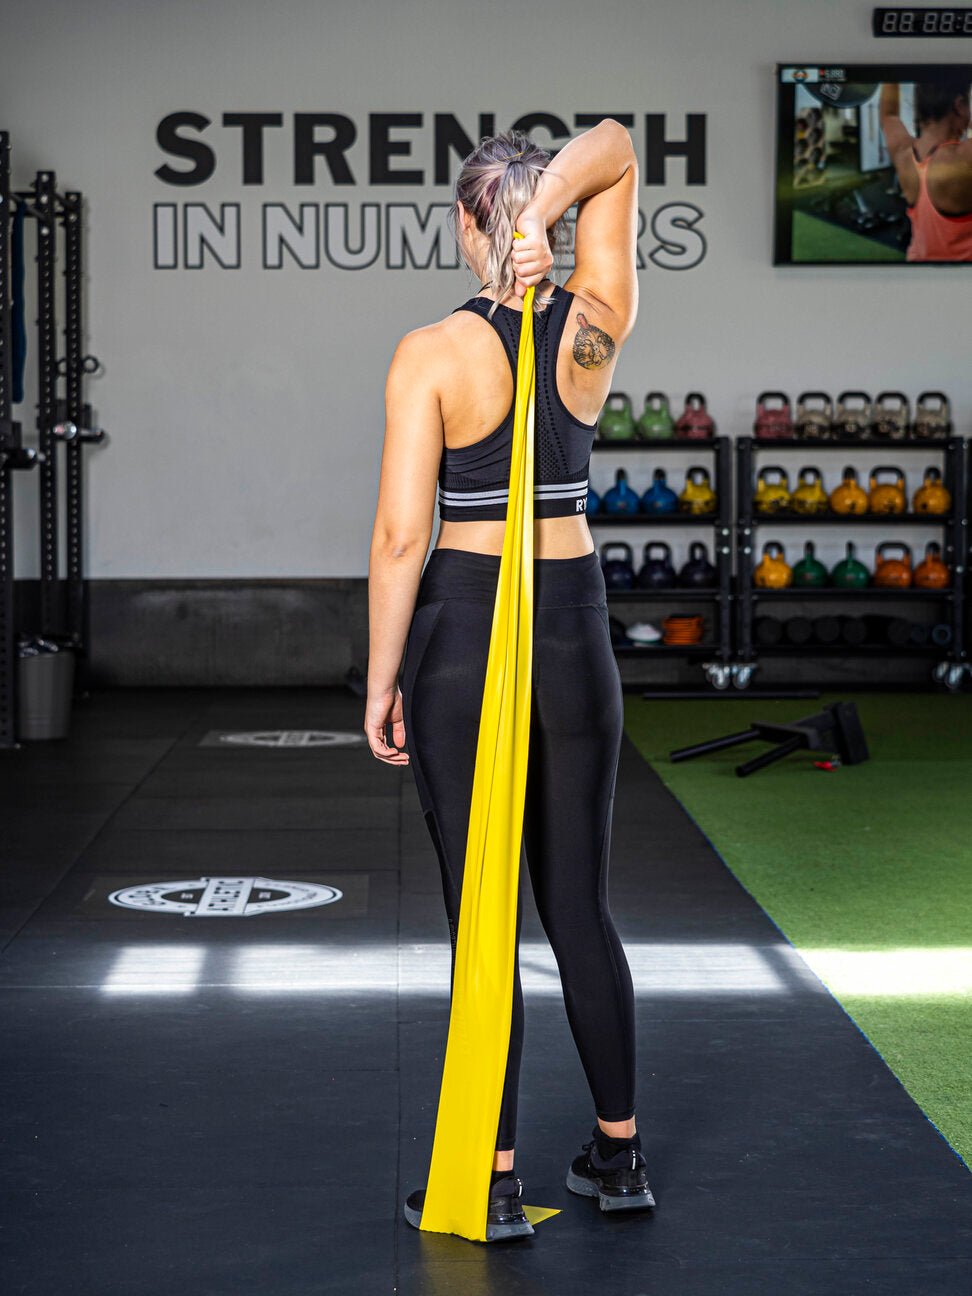 5 Tips for Using a Resistance Band on Your Shoulder - POWERBANDS®